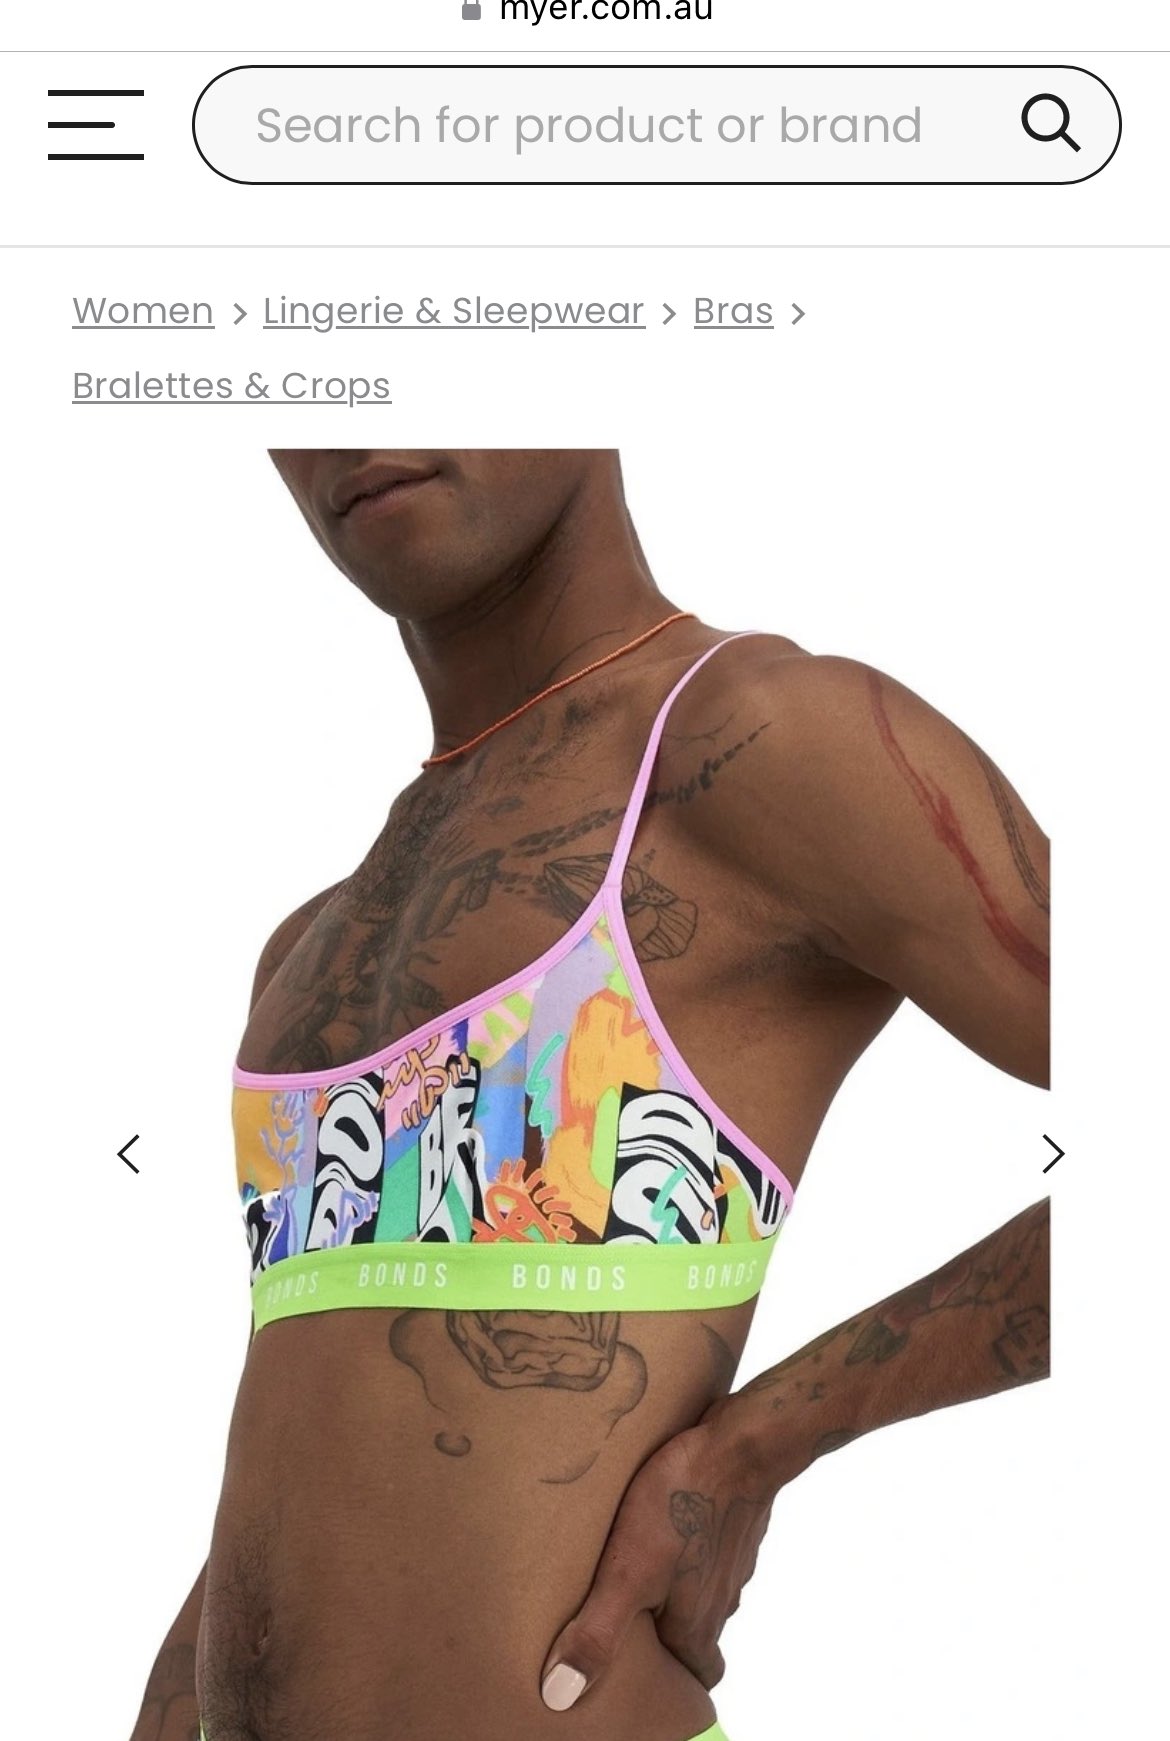 Jo on X: This is currently on the @myer website under women's bras. Men  are not women. @BondsAus & Myer have lost my business unless they remove  the images and cease the